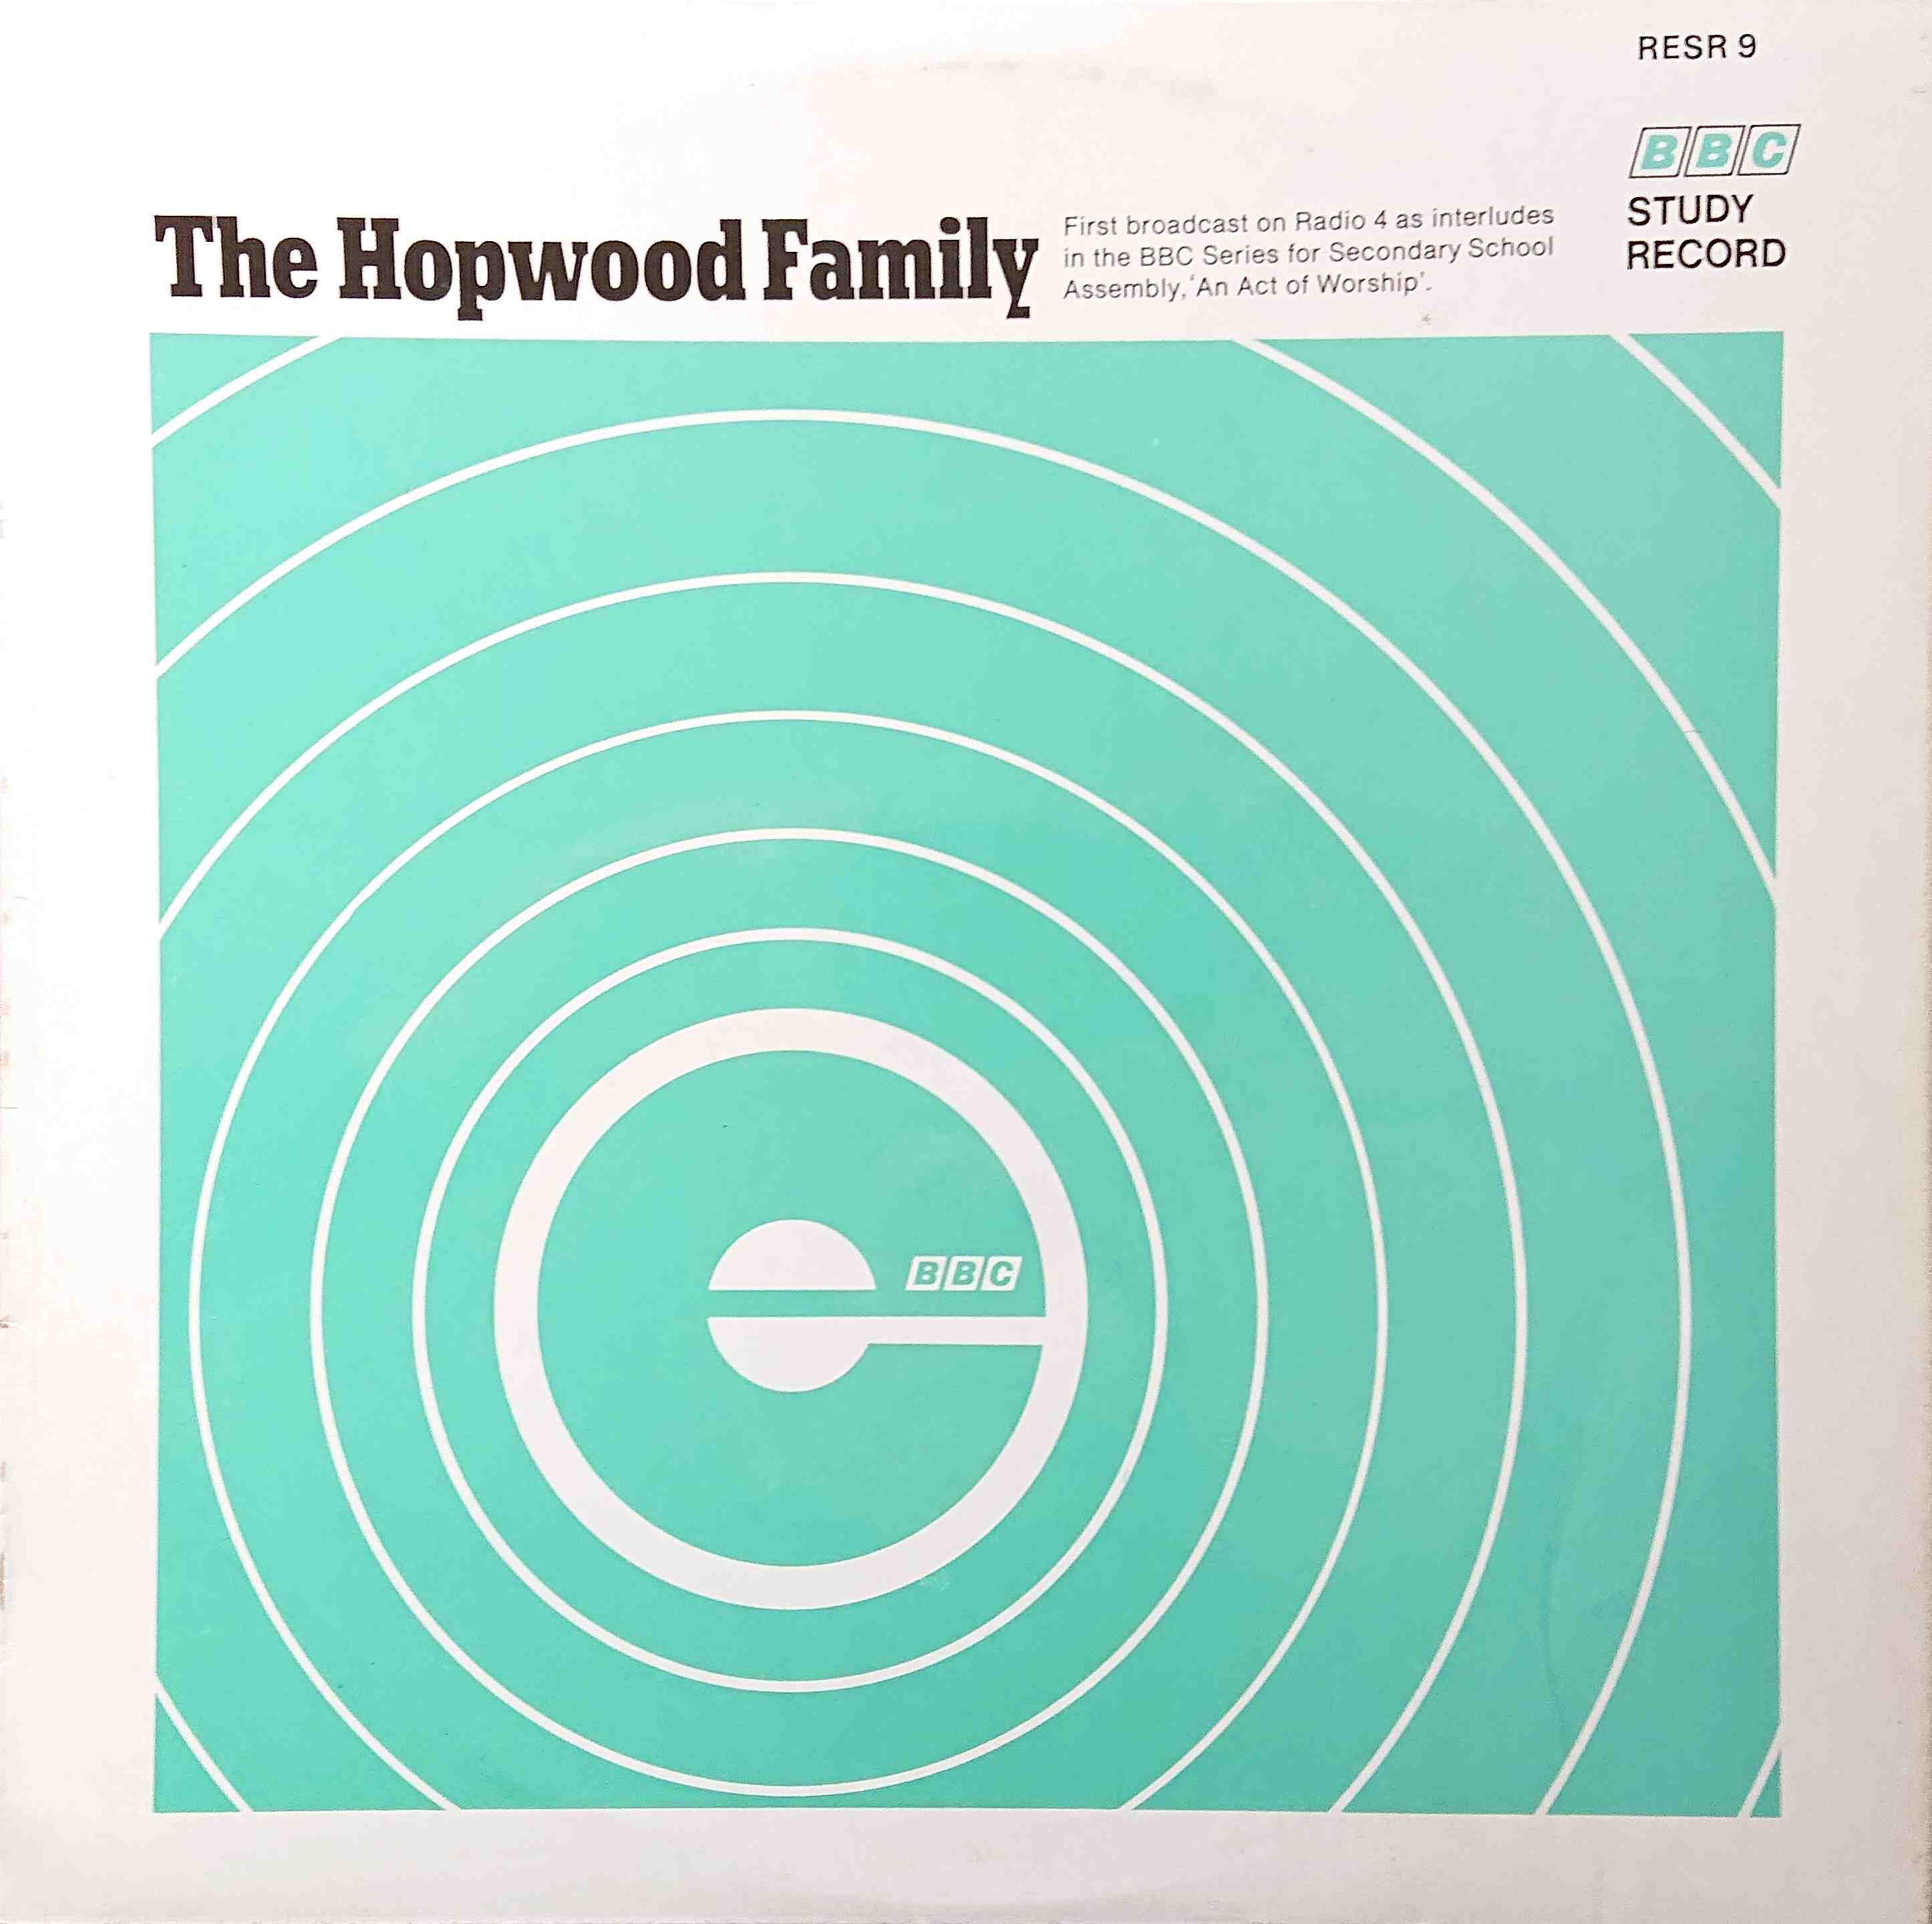 Picture of RESR 9 The Hopwood family by artist Robert Lamb from the BBC records and Tapes library